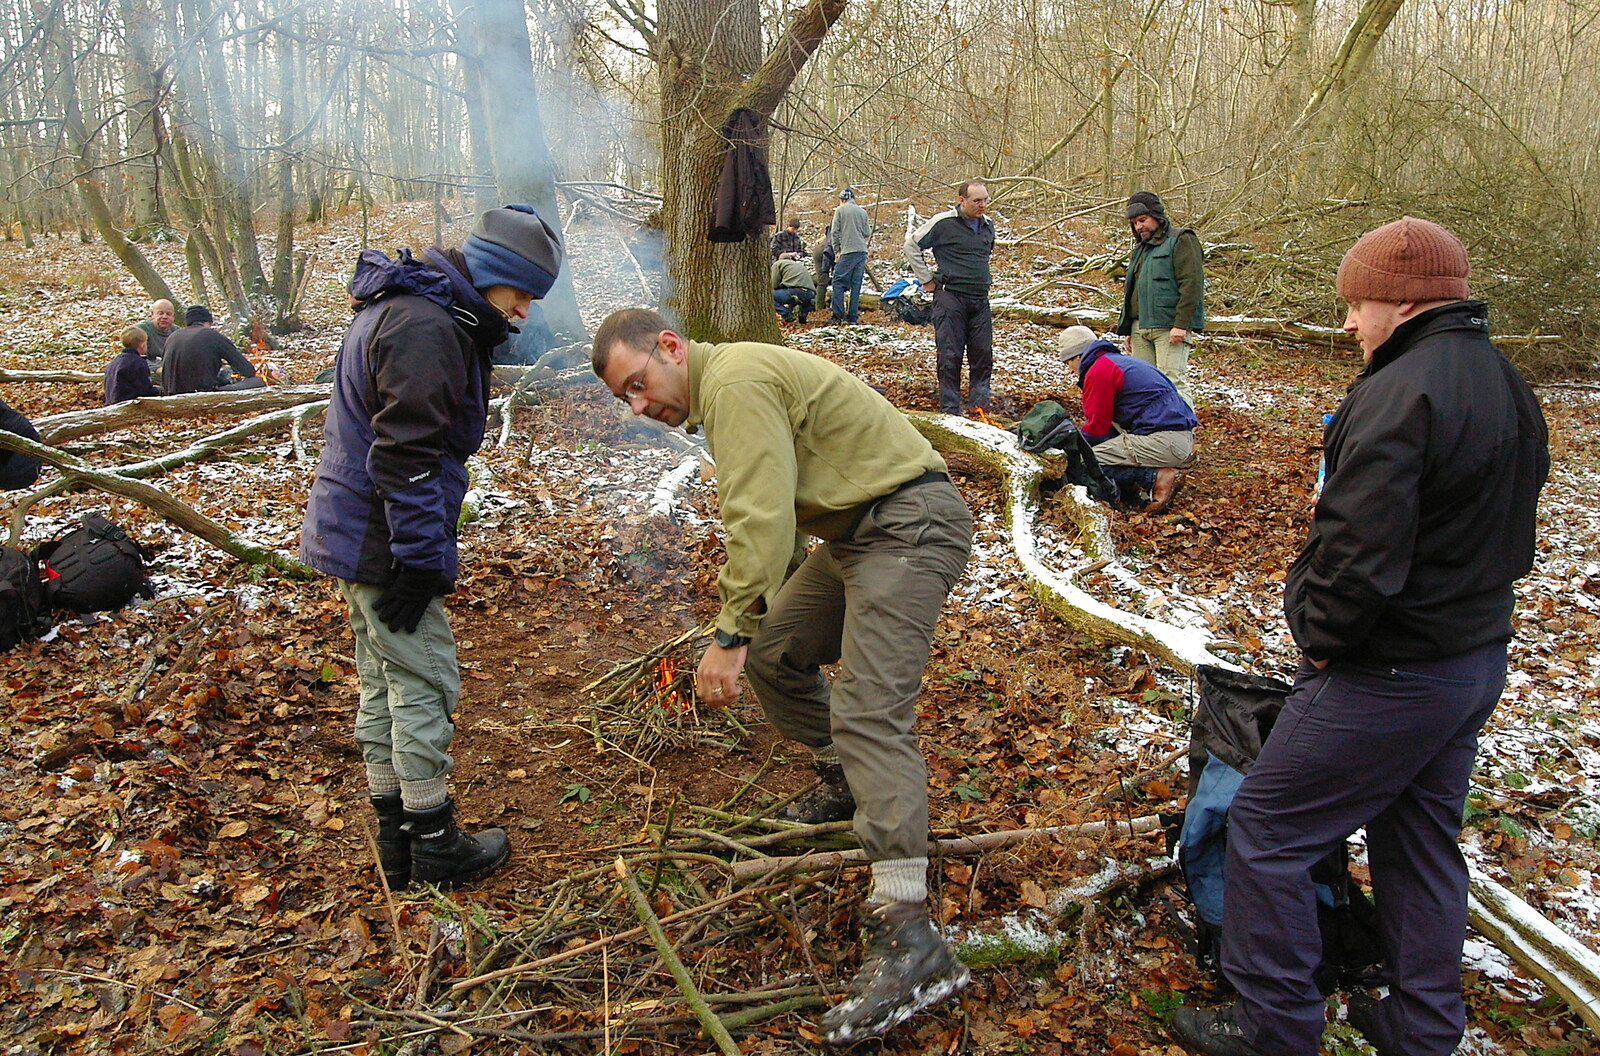 Nosher's group's firelighting efforts from Walk Like a Shadow: A Day With Ray Mears, Ashdown Forest, East Sussex - 29th December 2005